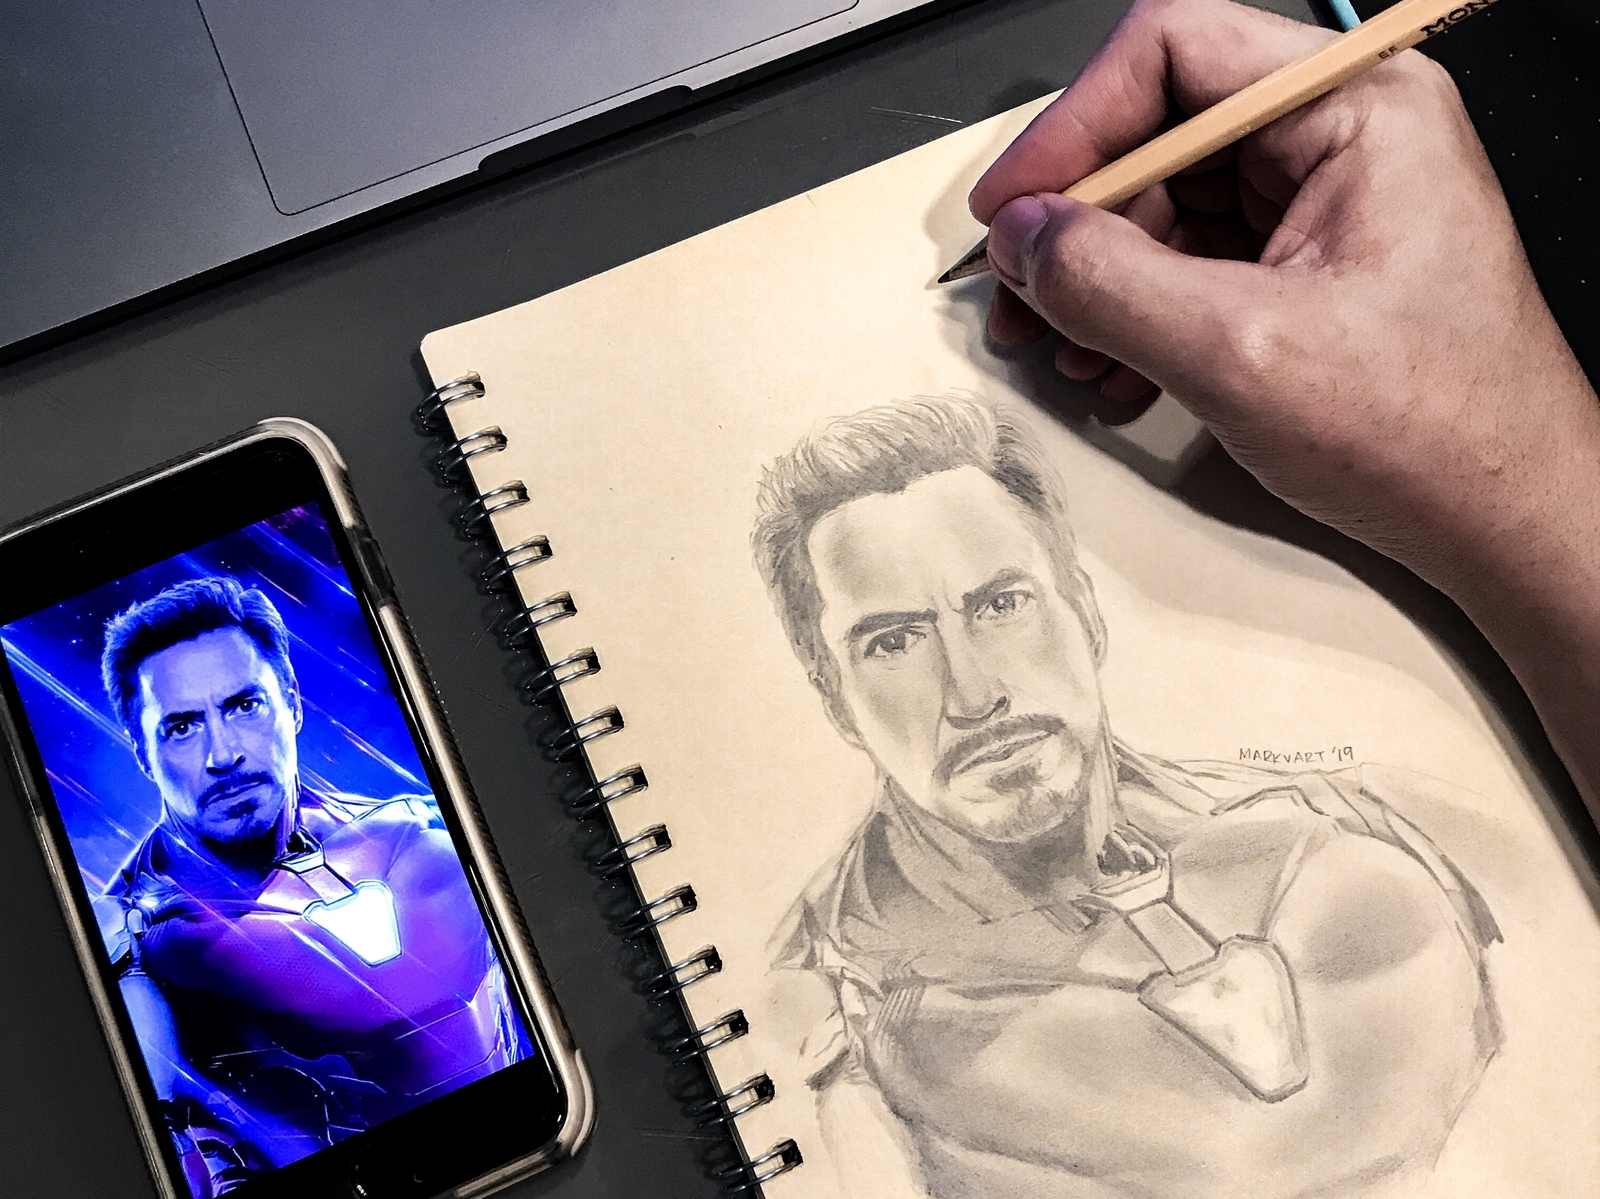 30 hours complete to this drawing, iron man drawing ( tony stark)... . .  𝙈𝙖𝙩𝙚𝙧𝙞𝙖𝙡 𝙪𝙨𝙚𝙙 𝙋𝙚𝙣𝙘𝙞𝙡 : brustro pencil 𝙀𝙧𝙖𝙨𝙚𝙧 :  electric… | Instagram